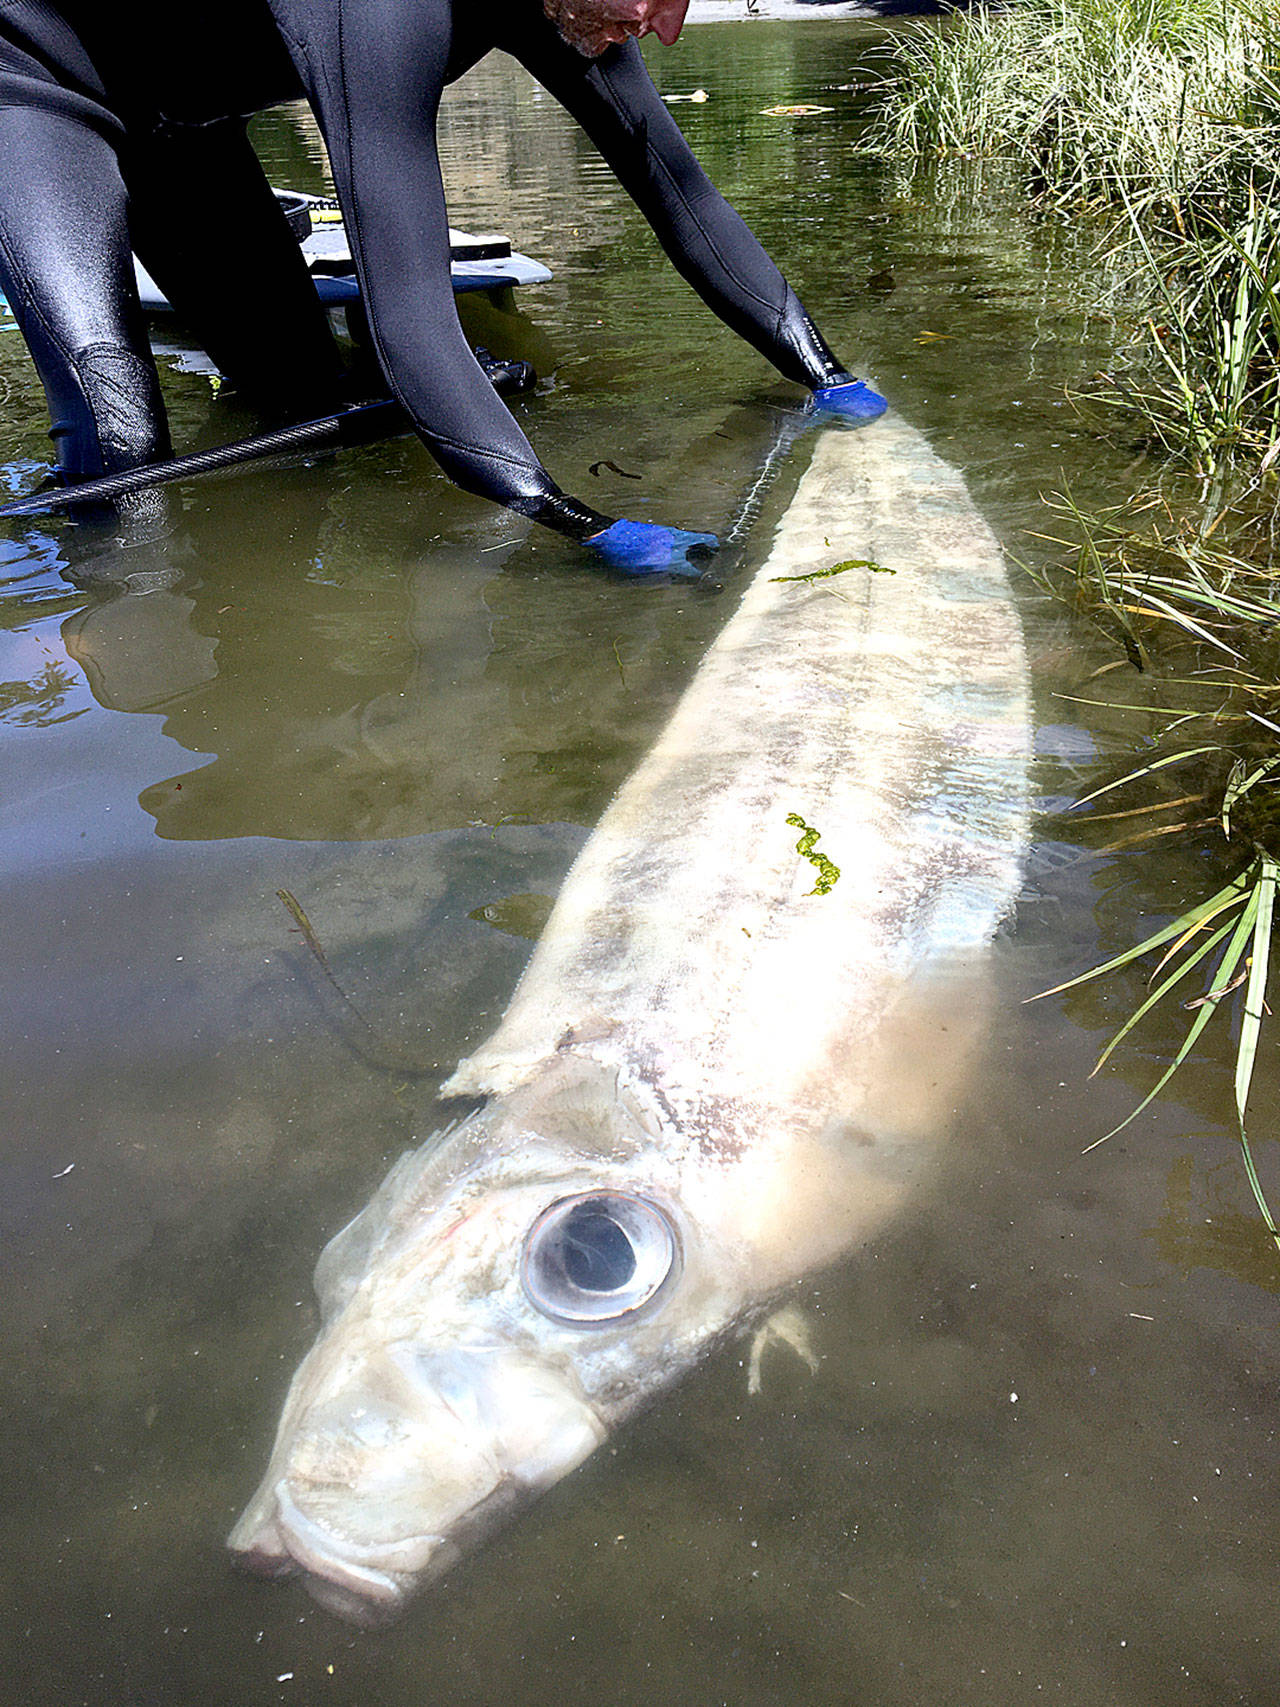 A rare King-of-the-Salmon 4 1/2 feet long was found washed up at Salt Creek Recreation Area Sunday. These fish normally live at a depth of 3,000 feet and are rarely seen alive.